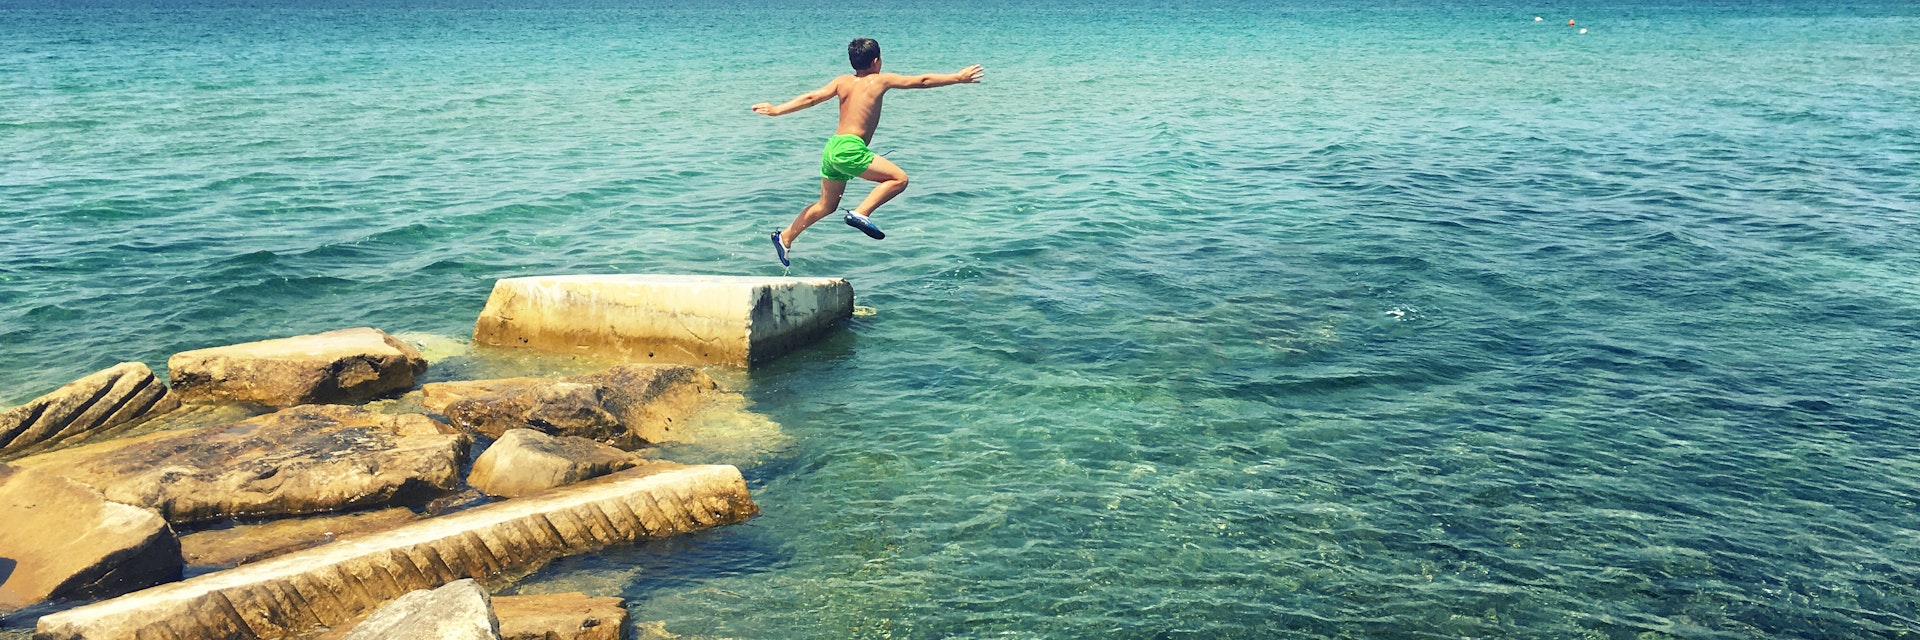 Boy jumping off rocks into the sea.